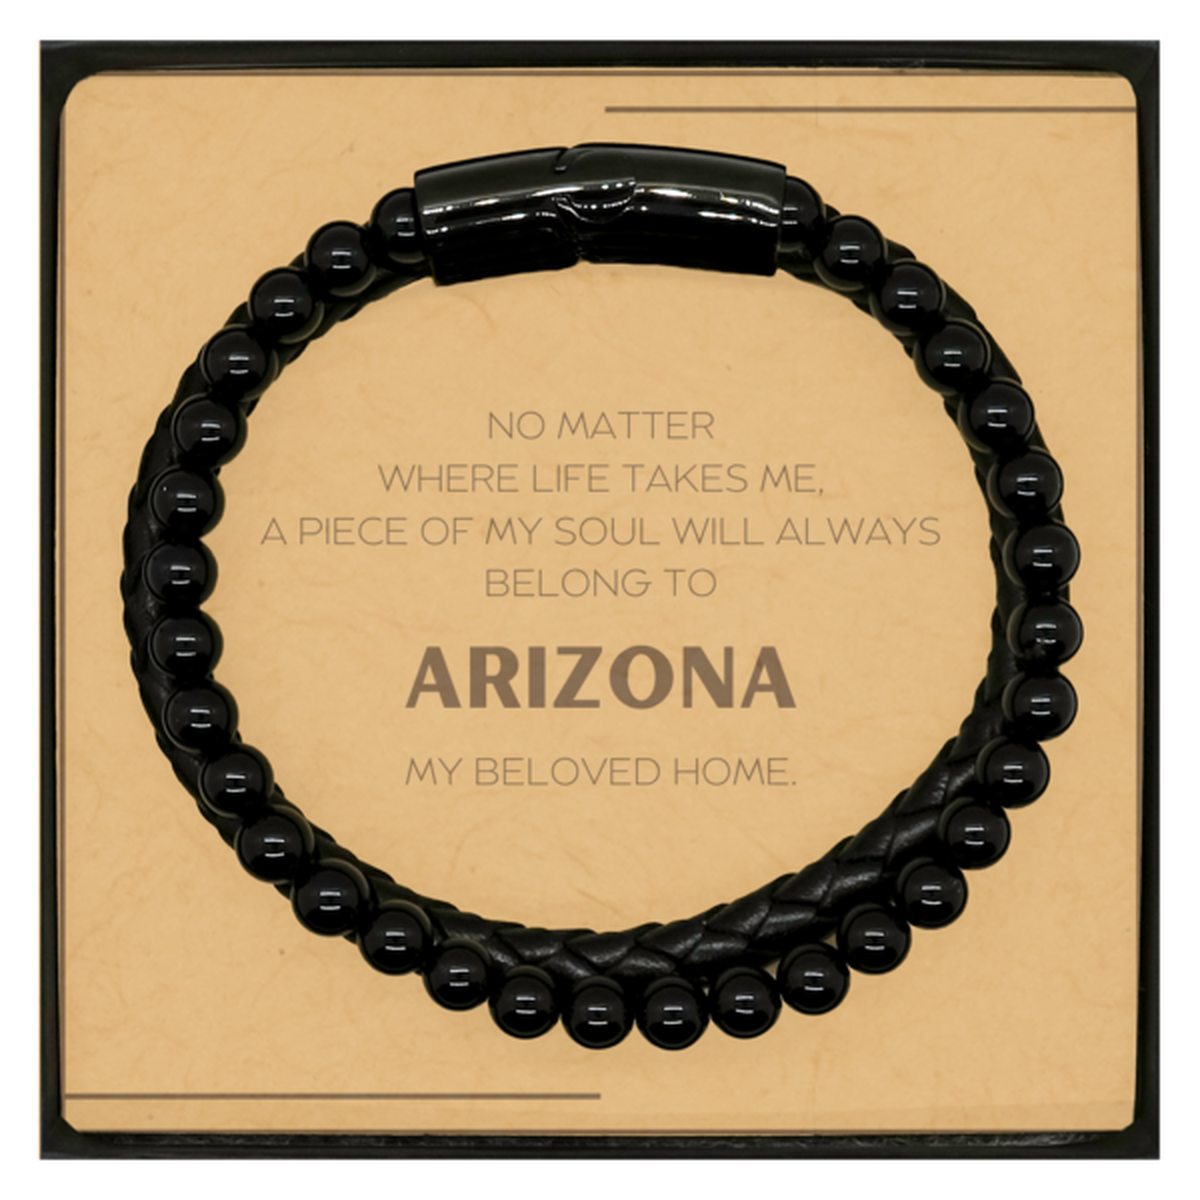 Love Arizona State Gifts, My soul will always belong to Arizona, Proud Stone Leather Bracelets, Birthday Christmas Unique Gifts For Arizona Men, Women, Friends